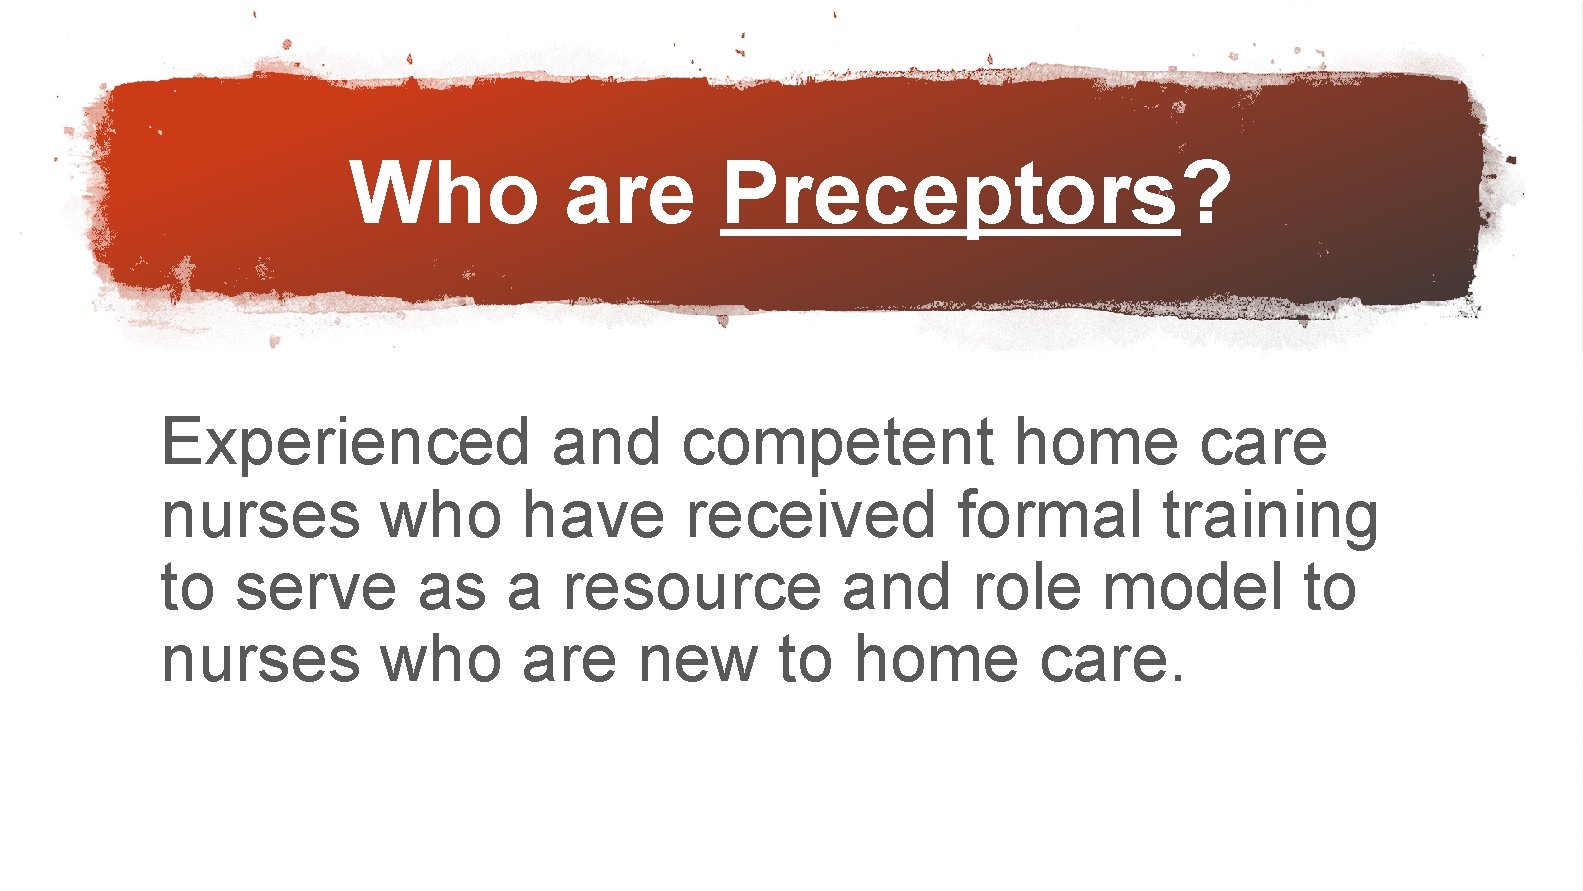 Who are Preceptors? Experienced and competent home care nurses who have received formal training